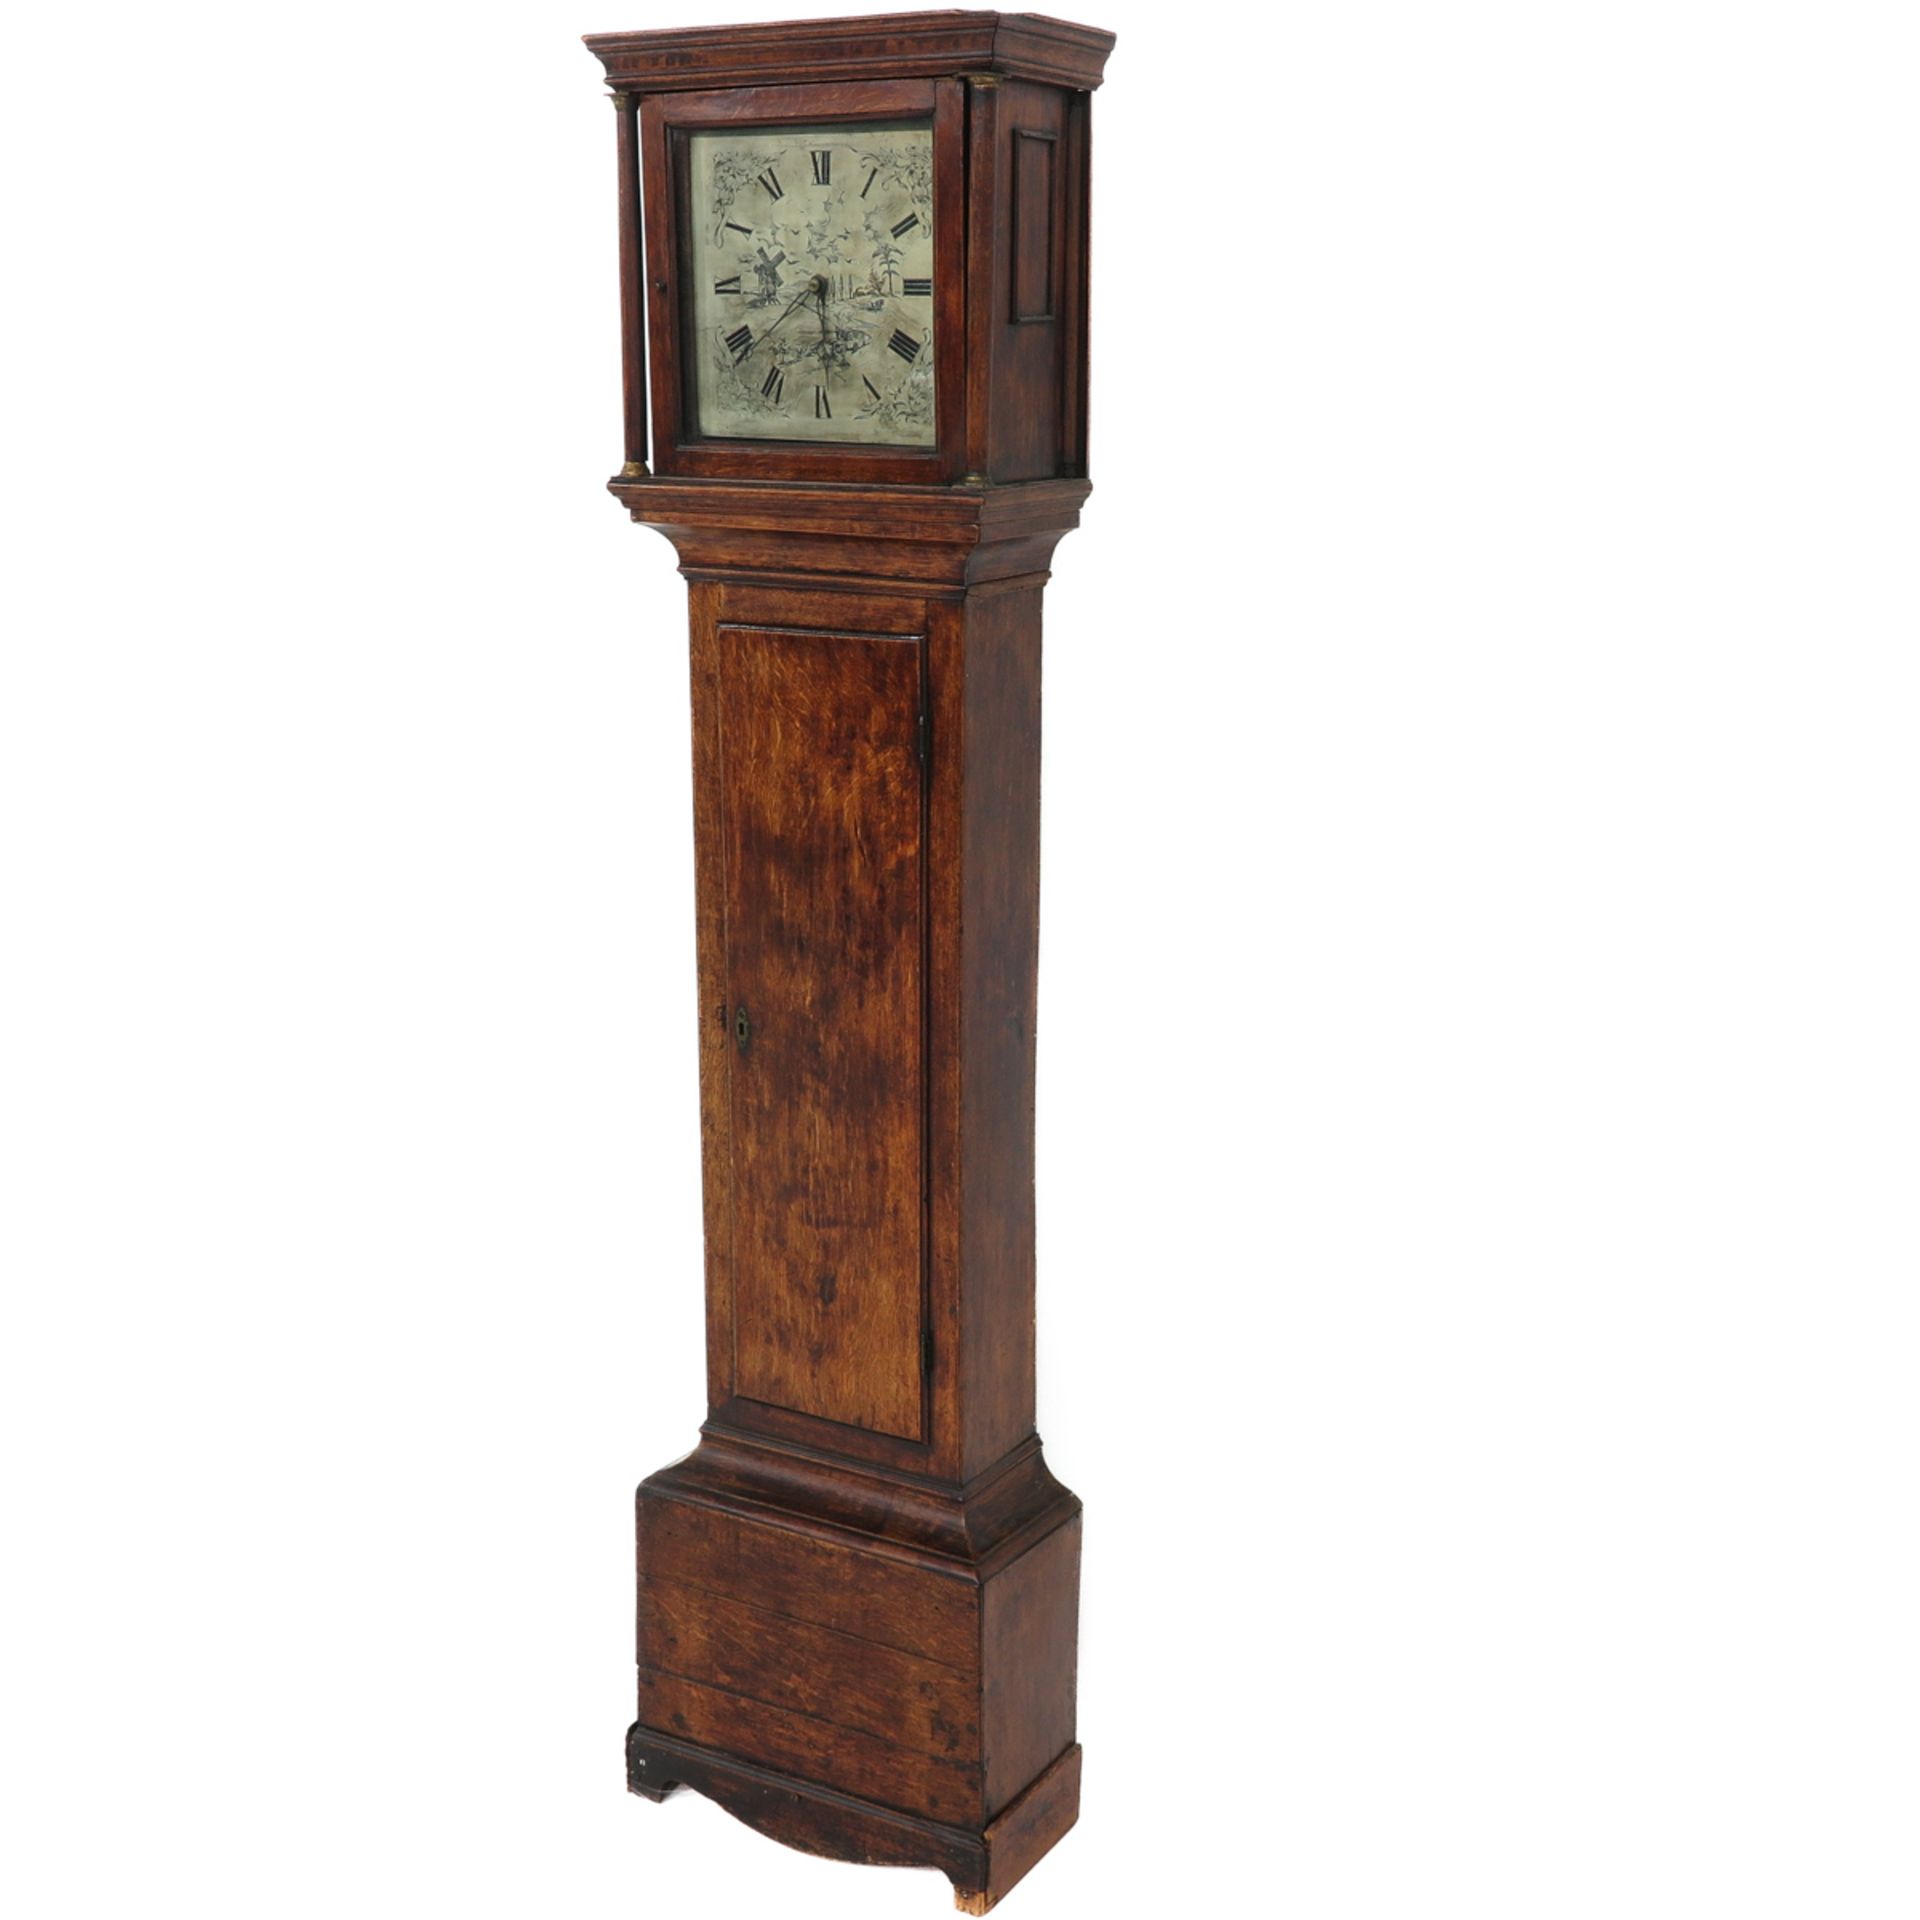 An English Standing Clock - Image 3 of 8